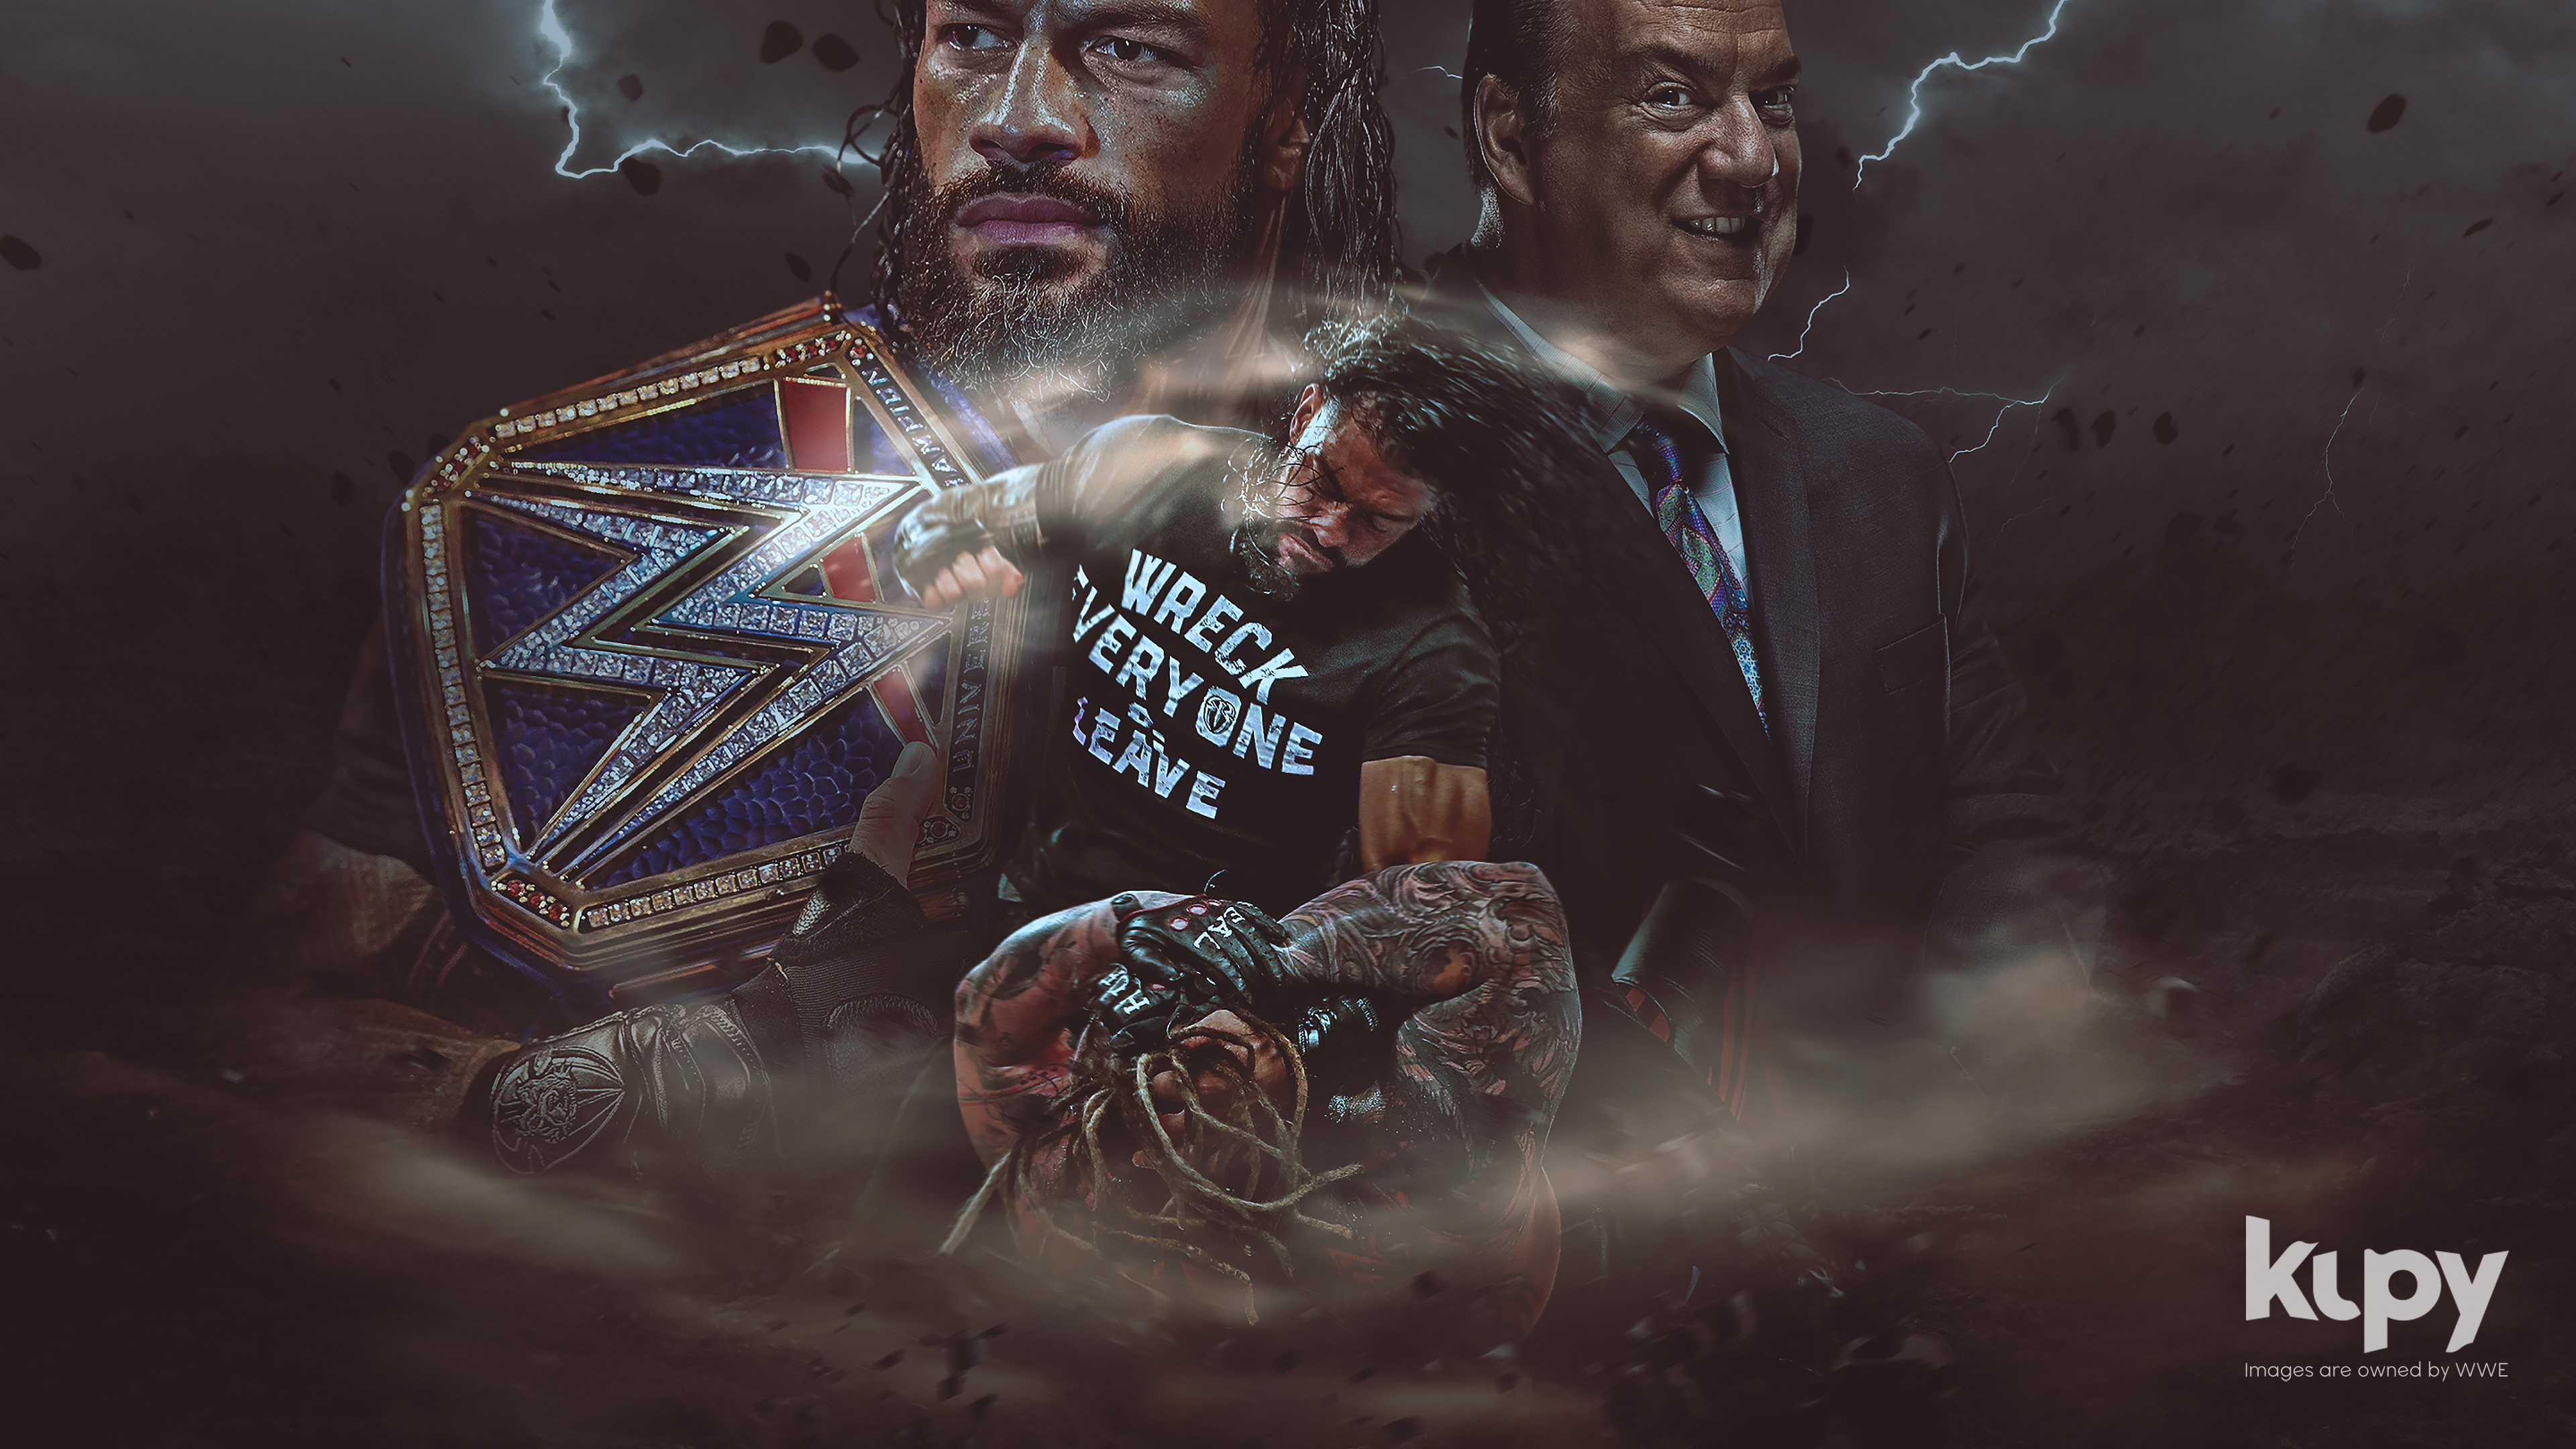 Kupy Wrestling Wallpapers The Latest Source For Your Wwe Wrestling Wallpaper Needs Mobile Hd And 4k Resolutions Available Blog Archive New Roman Reigns Universal Champion 2020 Wallpaper Kupy Wrestling